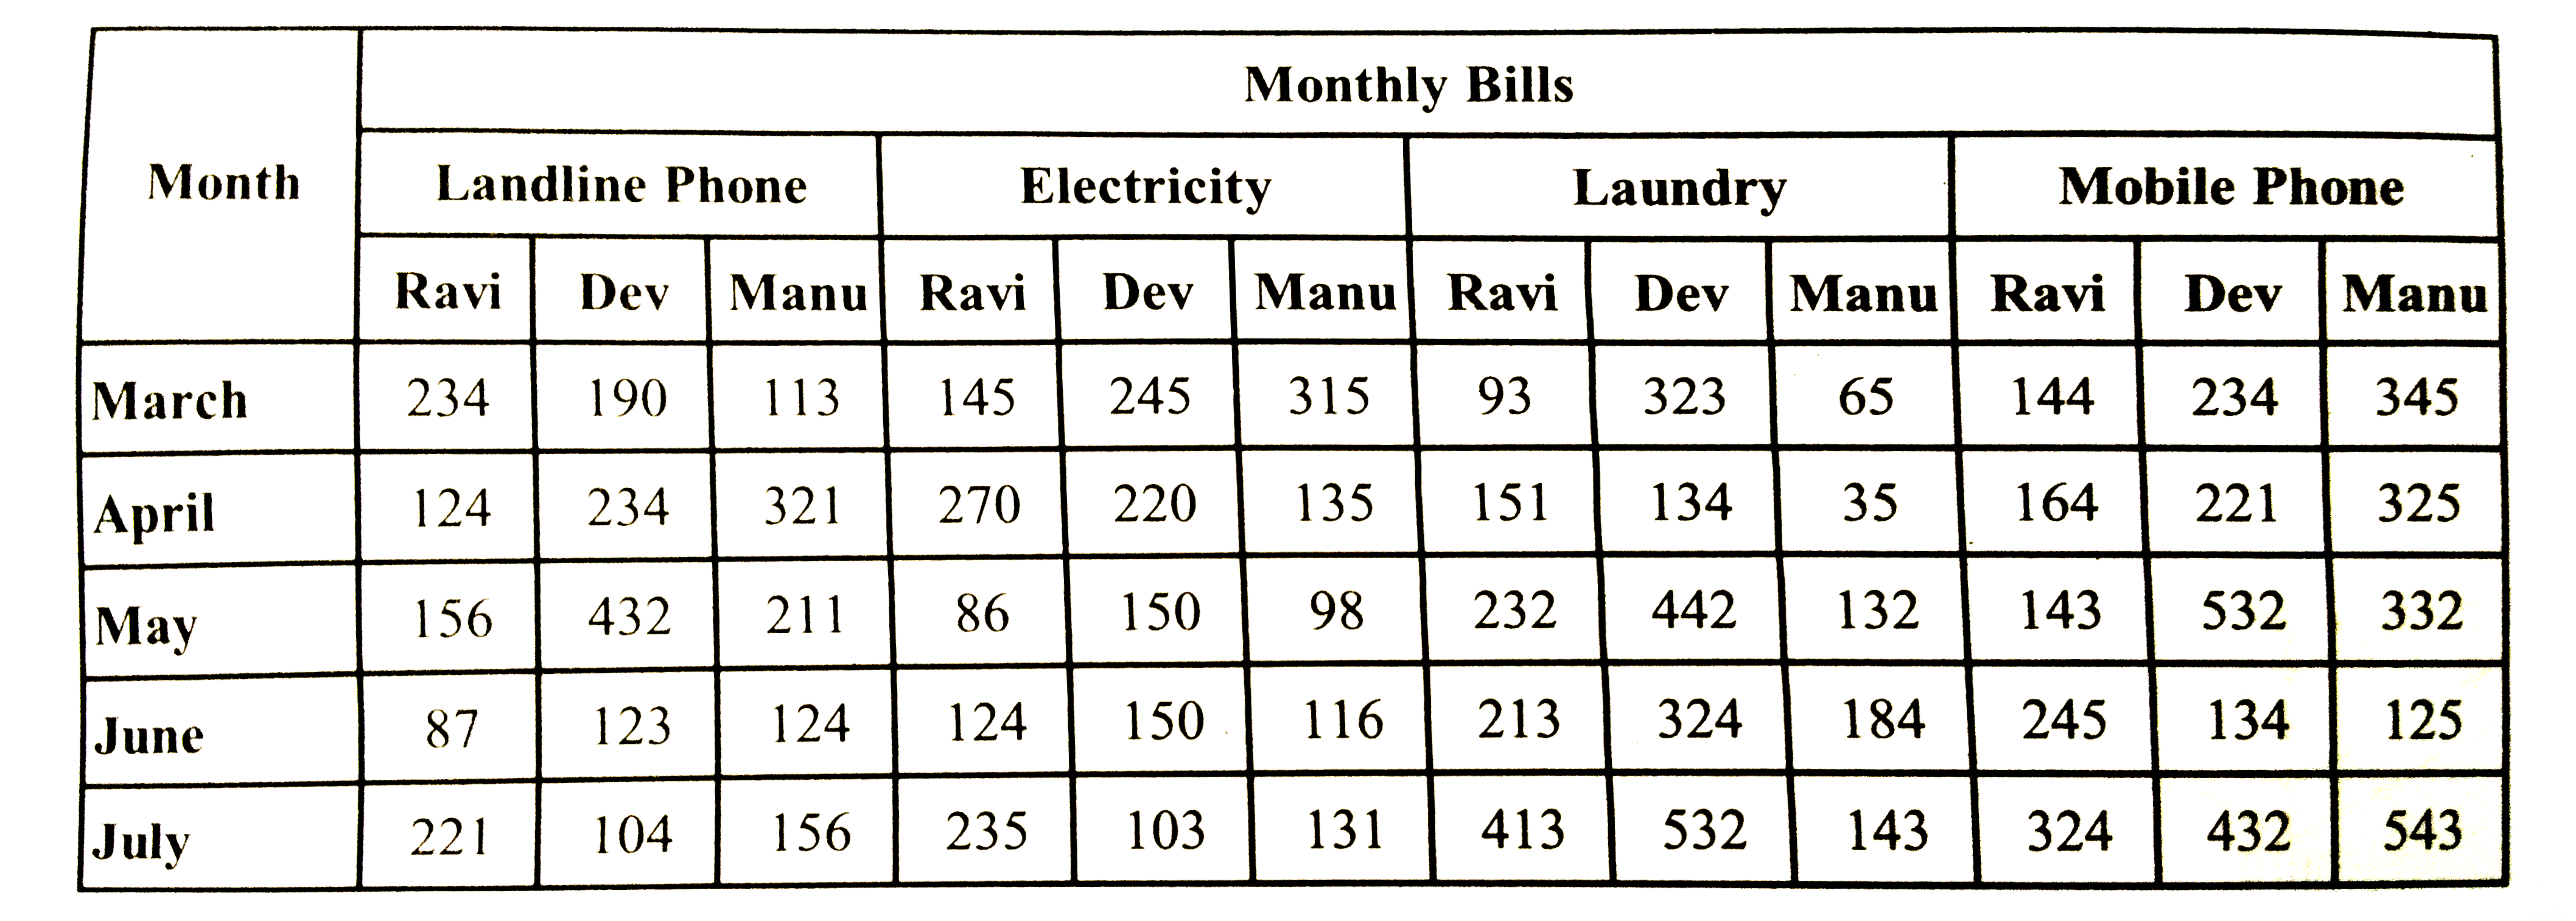 What is the difference between the mobile phone bill paid by Ravi in the month of May and the laundry bill paid by Dev in the month of March ?